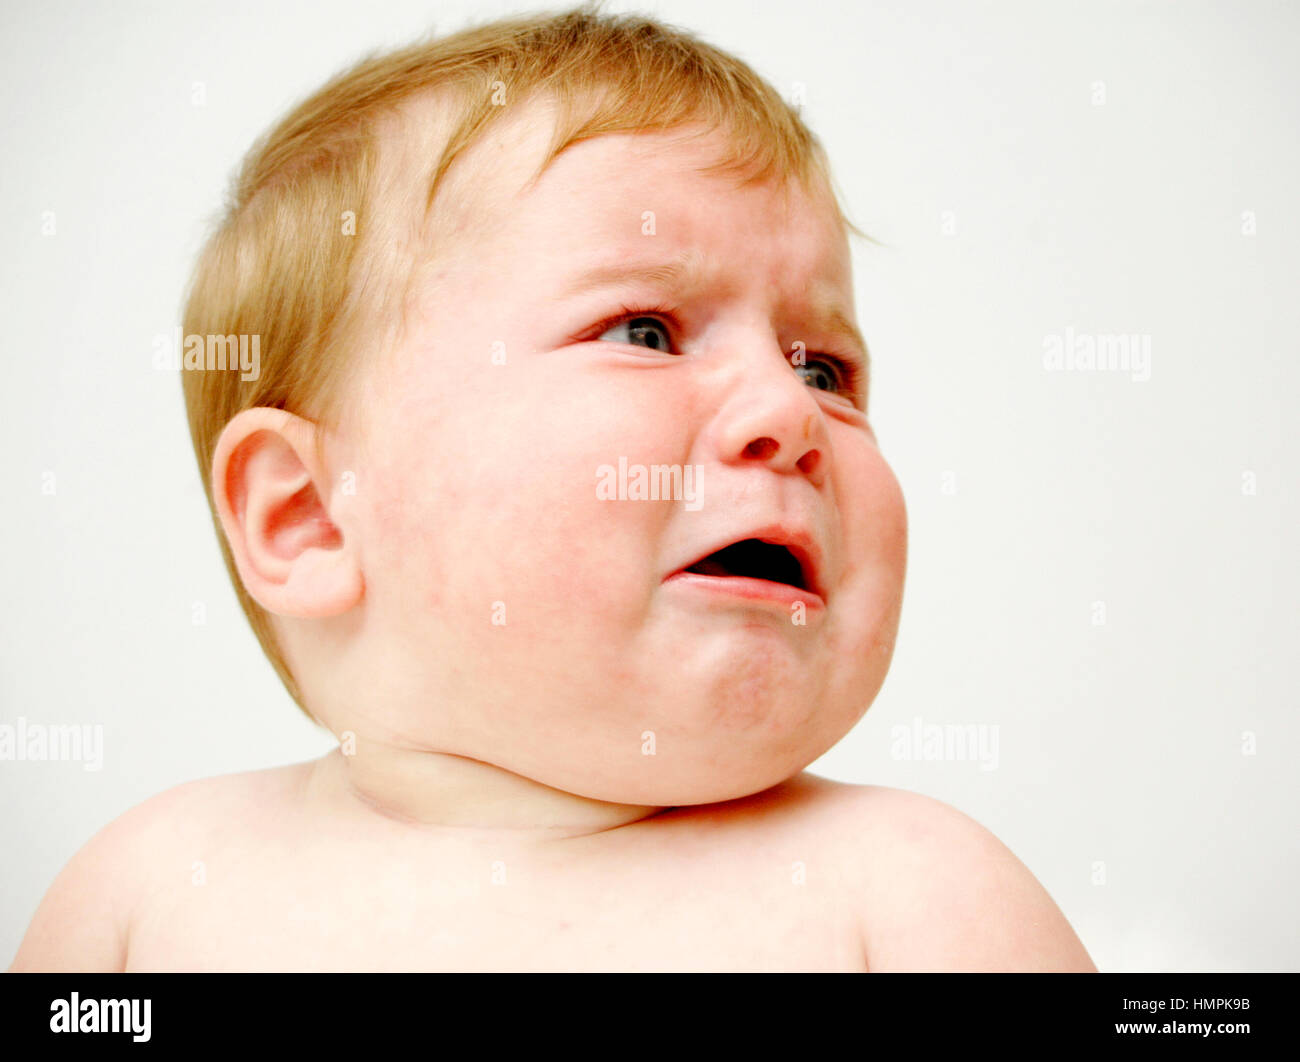 7 month old baby crying Stock Photo